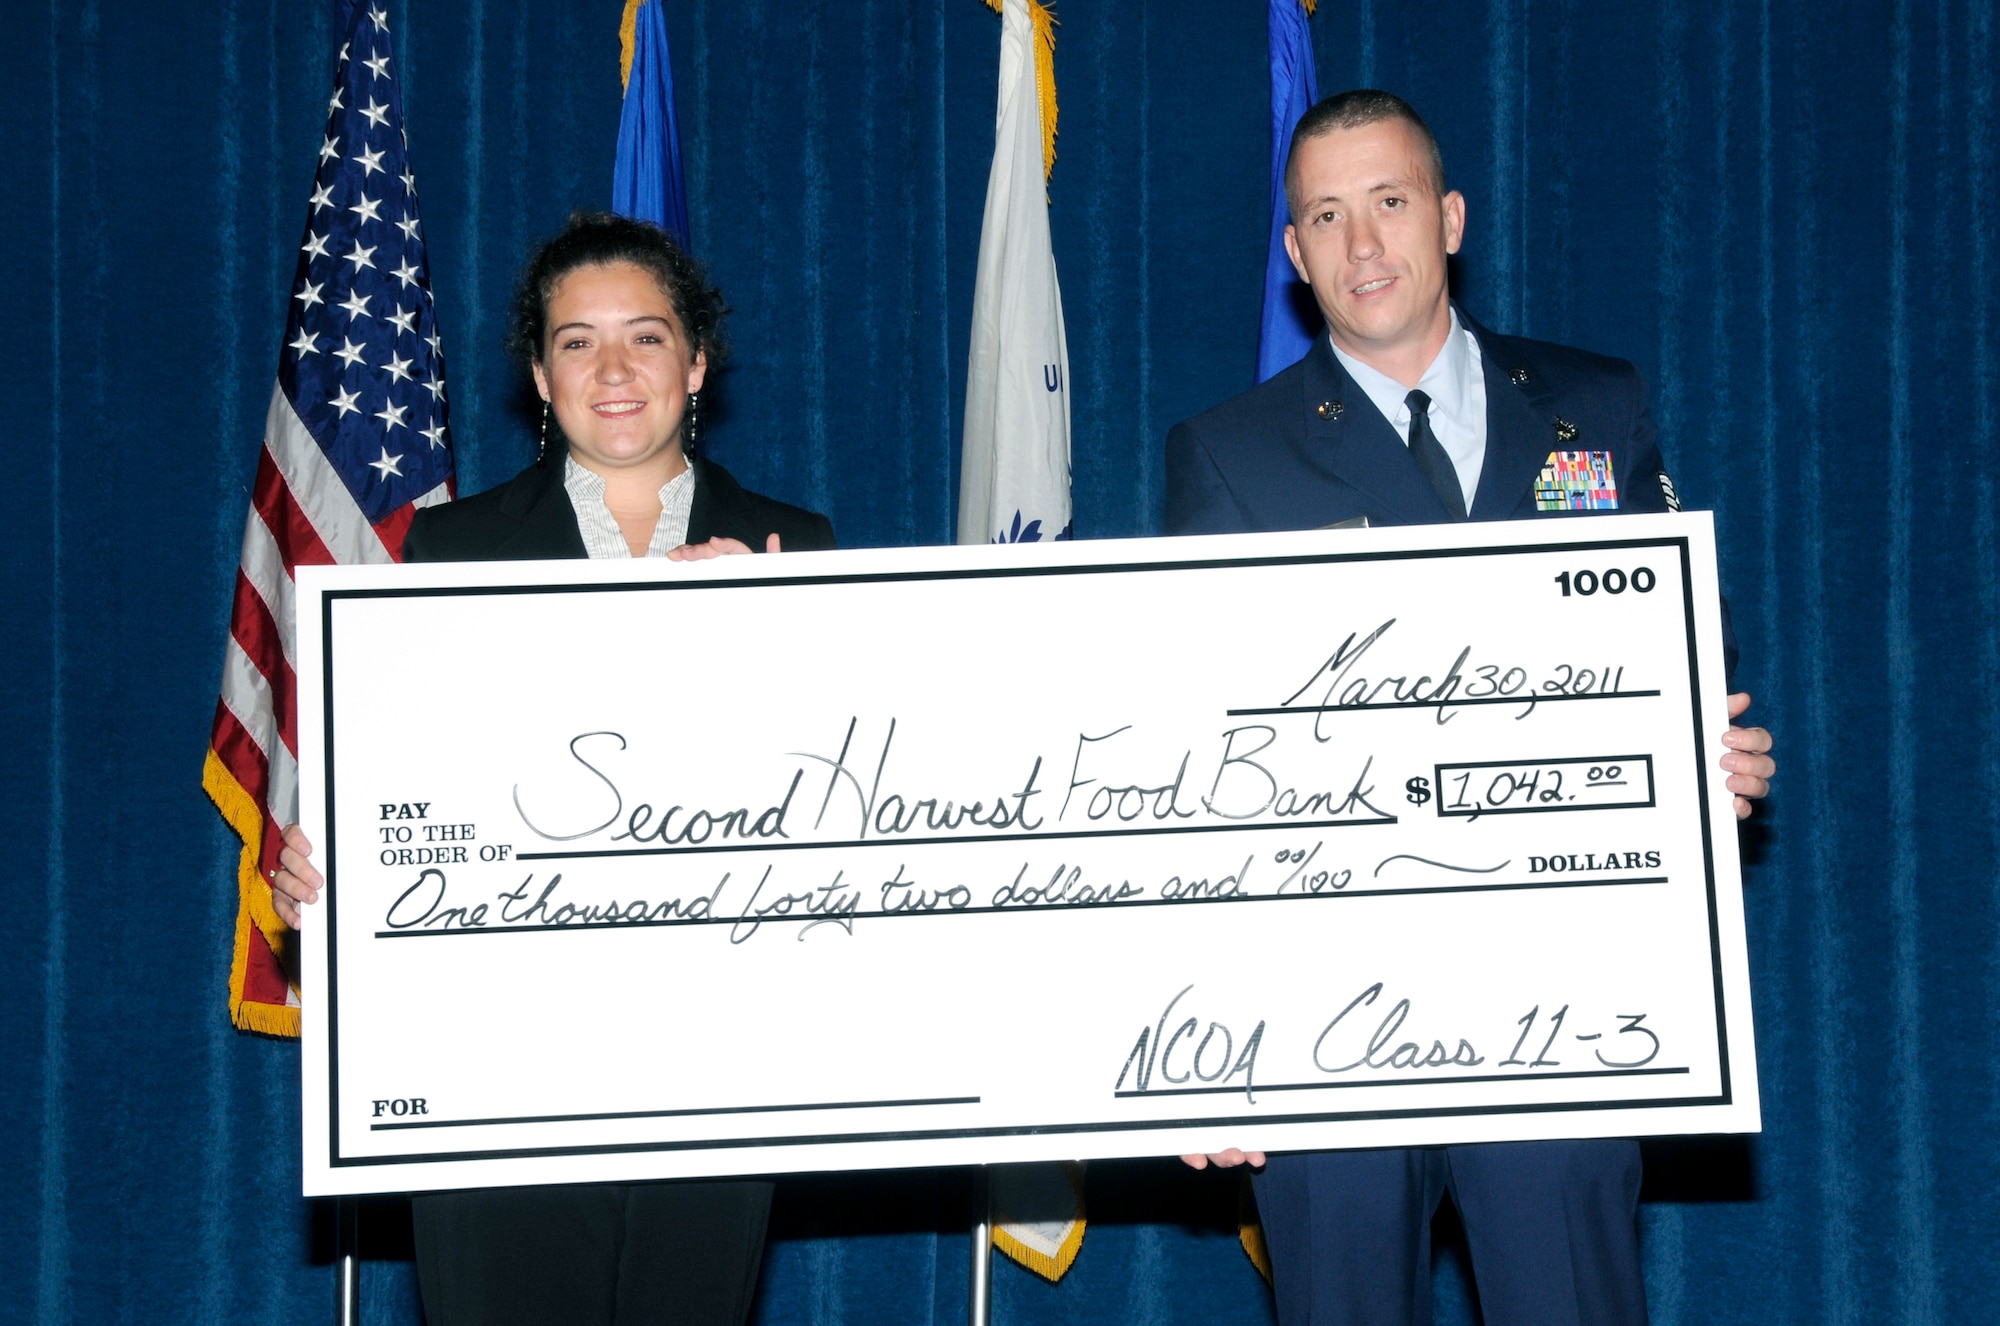 McGHEE TYSON AIR NATIONAL GUARD BASE, Tenn. - NCO Academy student Tech. Sgt. Jory J. Ohmer, right, the NCOIC of refueling maintenance at Charleston AFB, S.C., presents a check for $1,042 to Emily Cavender of the Second Harvest Food Bank of East Tennessee on behalf of Class 11-3 during their graduation ceremony at Wilson Hall here, March 30, 2011. (U.S. Air Force photo by Master Sgt. Kurt Skoglund/Released)